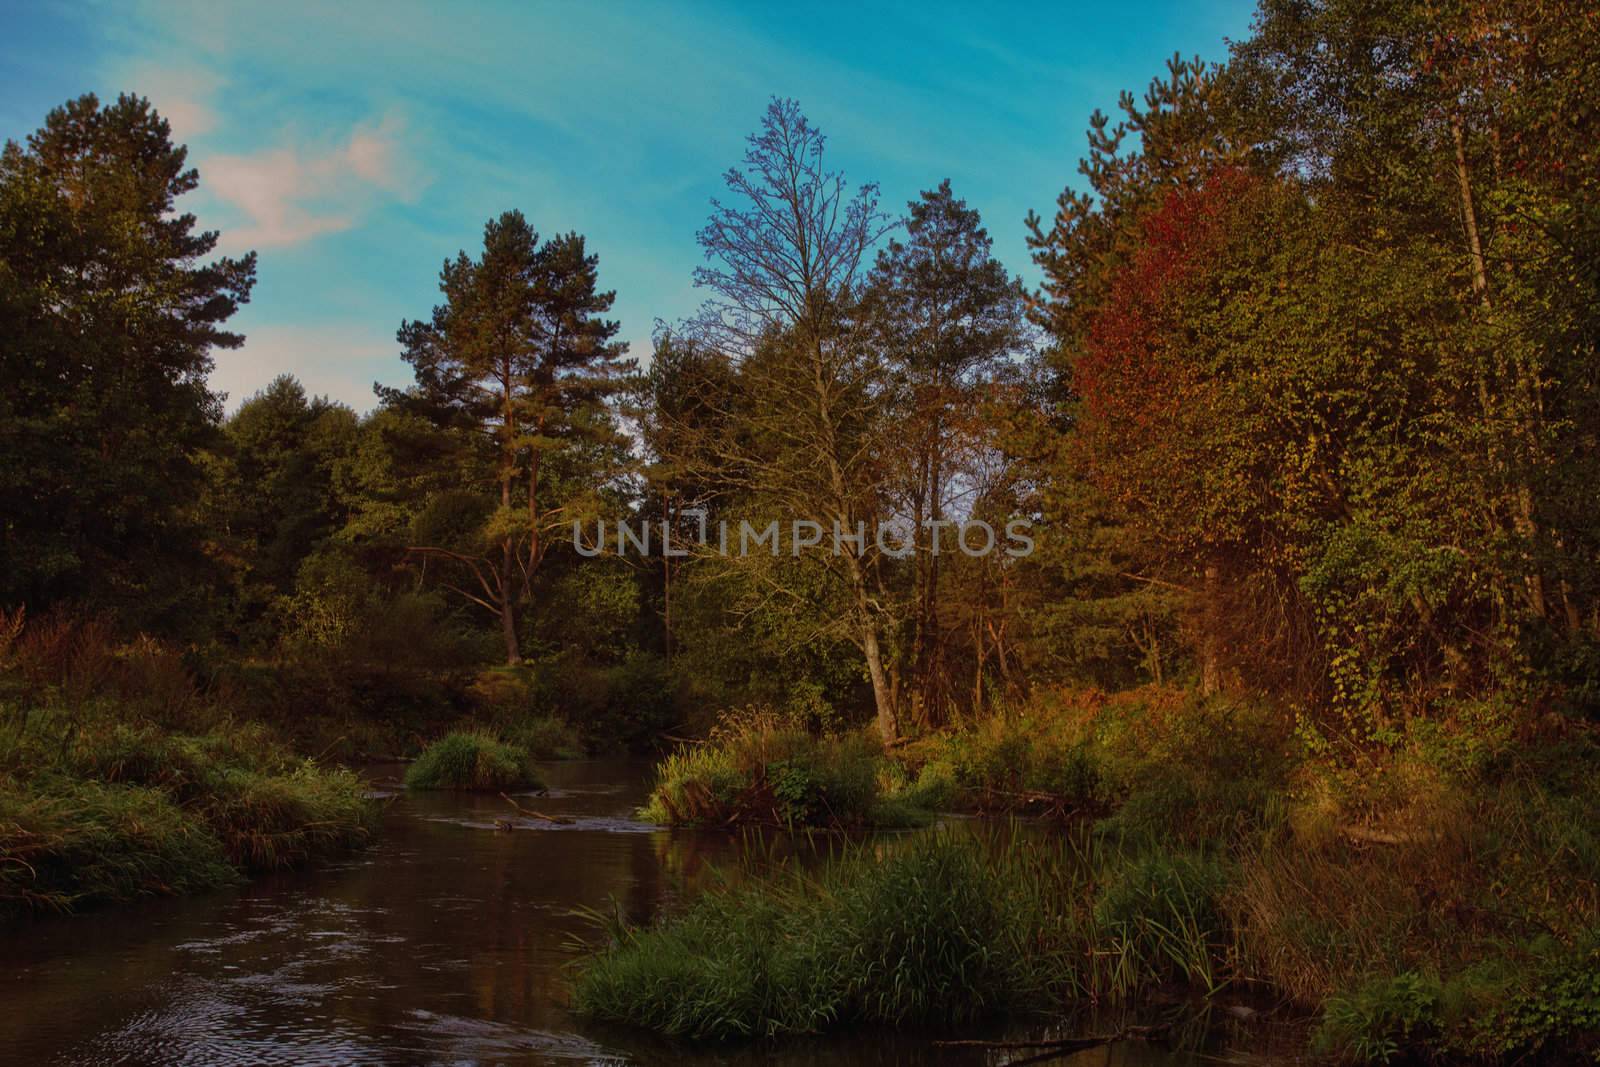 small river in autumn forest